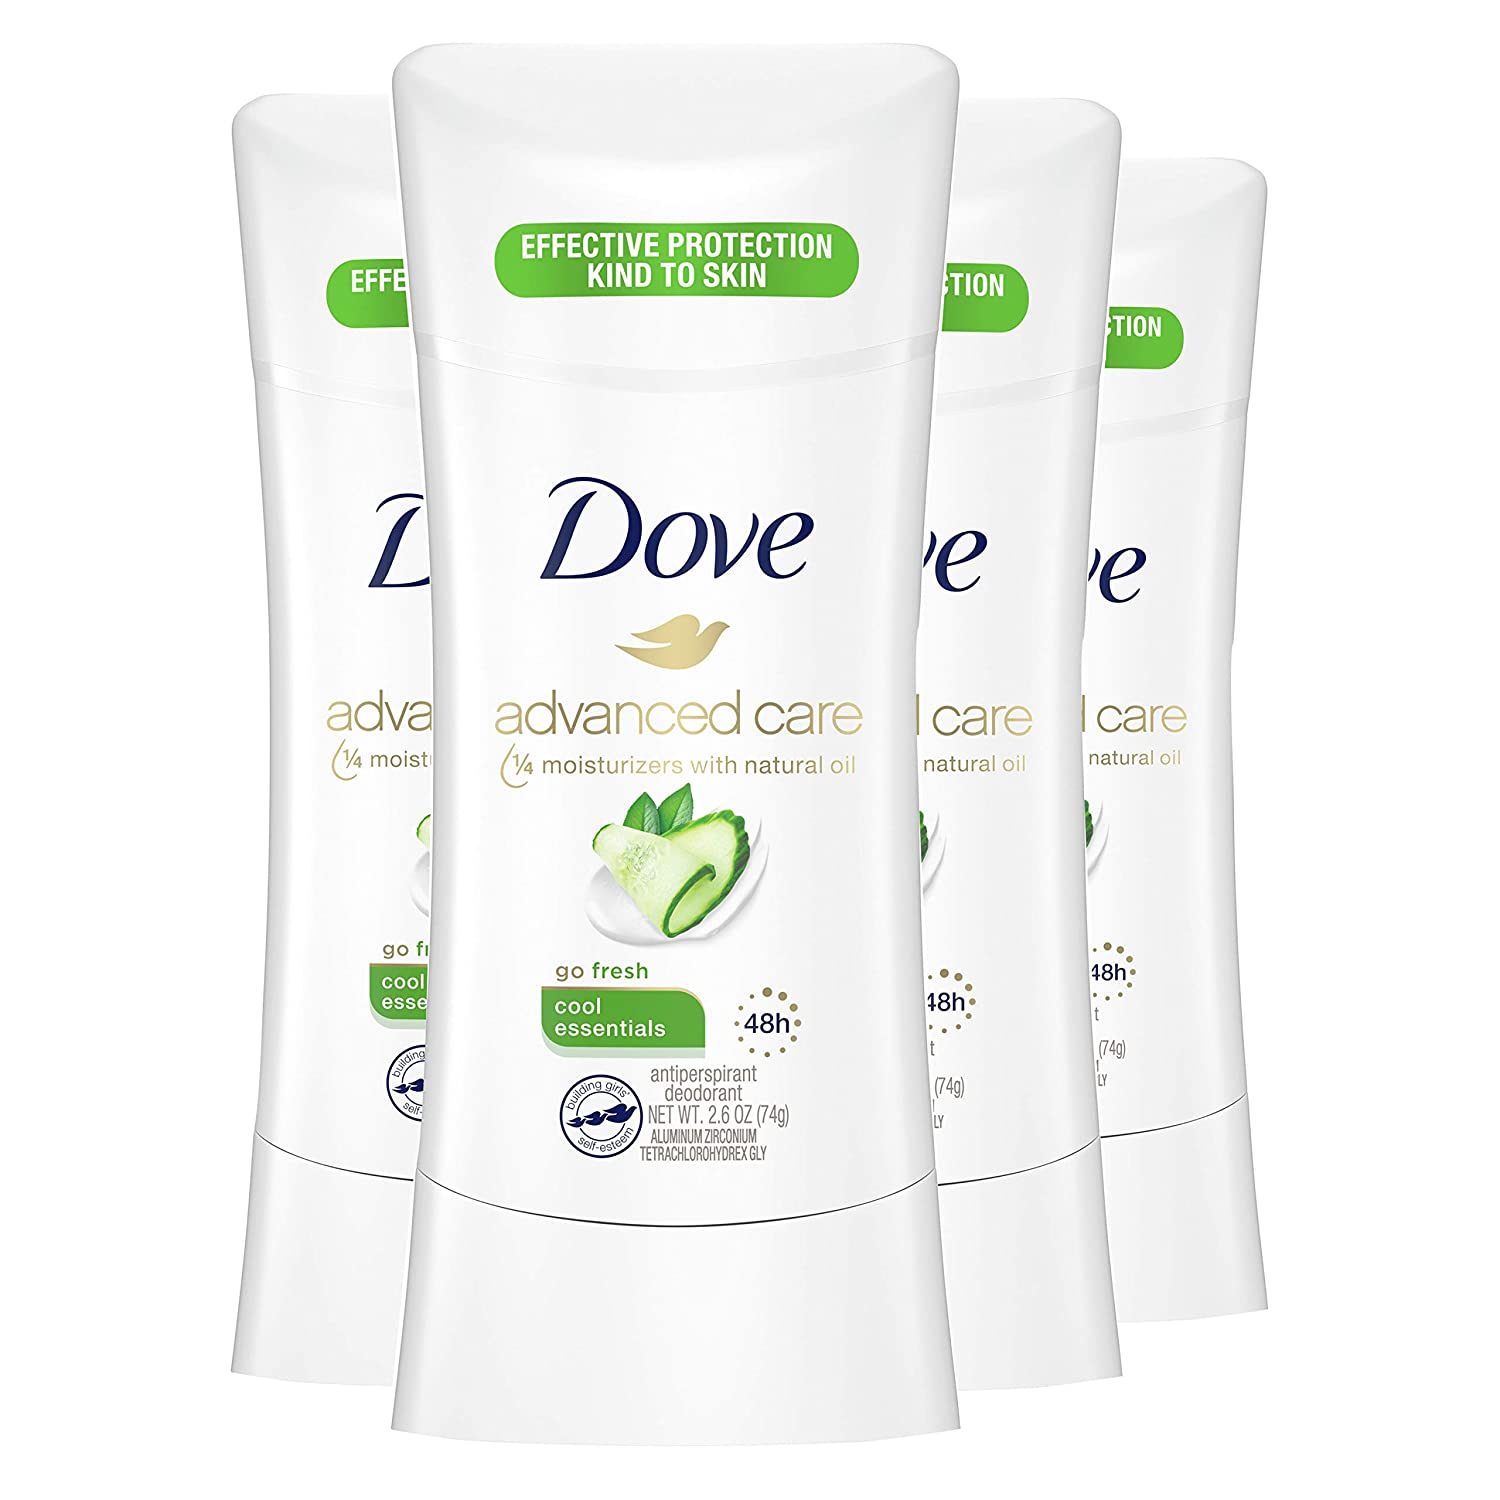 Dove Antiperspirant Deodorant with 48 Hour Protection - Atténuer les odeurs corporelles